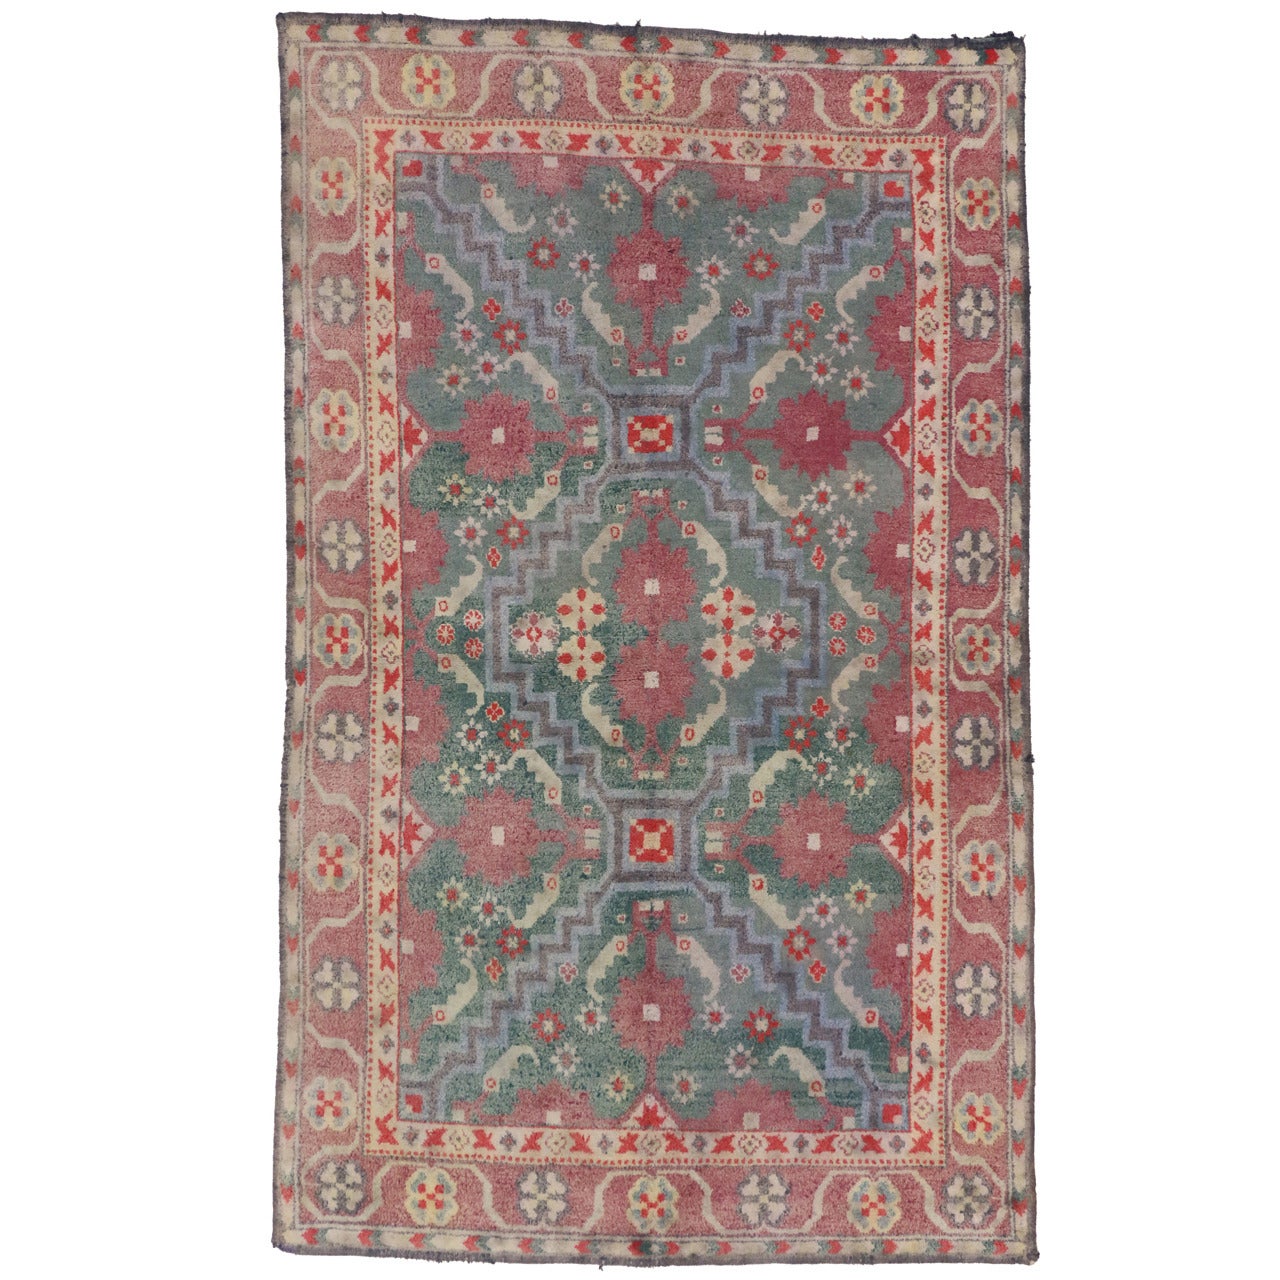 Antique Indian Agra Accent Rug with English Country Cottage Style